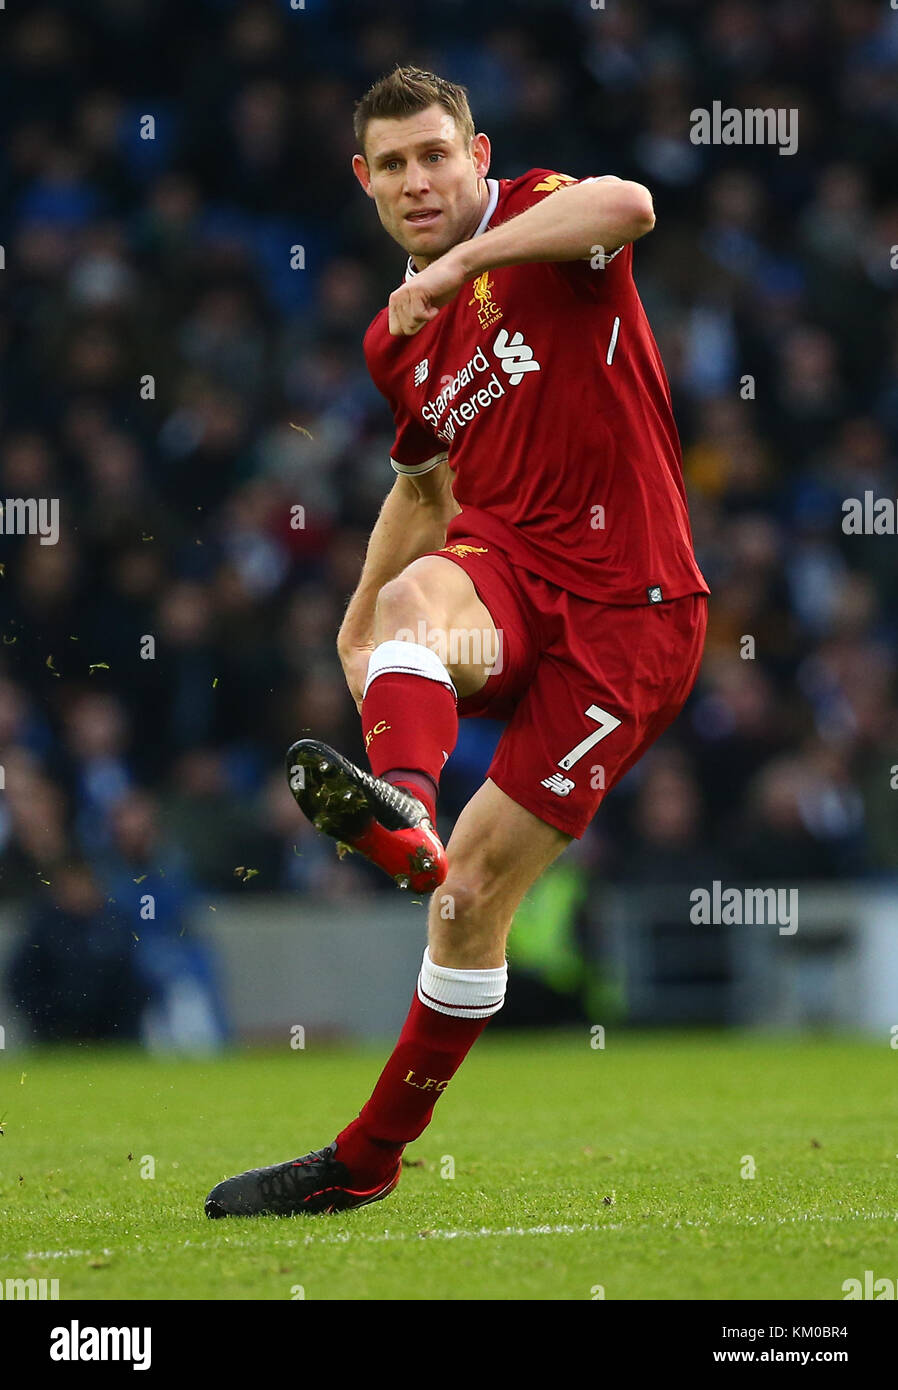 James Milner of Liverpool passes the ball during the Premier League match between Brighton and Hove Albion and Liverpool at the American Express Community Stadium in Brighton and Hove. 02 Dec 2017 *** EDITORIAL USE ONLY *** FA Premier League and Football League images are subject to DataCo Licence see www.football-dataco.com Stock Photo